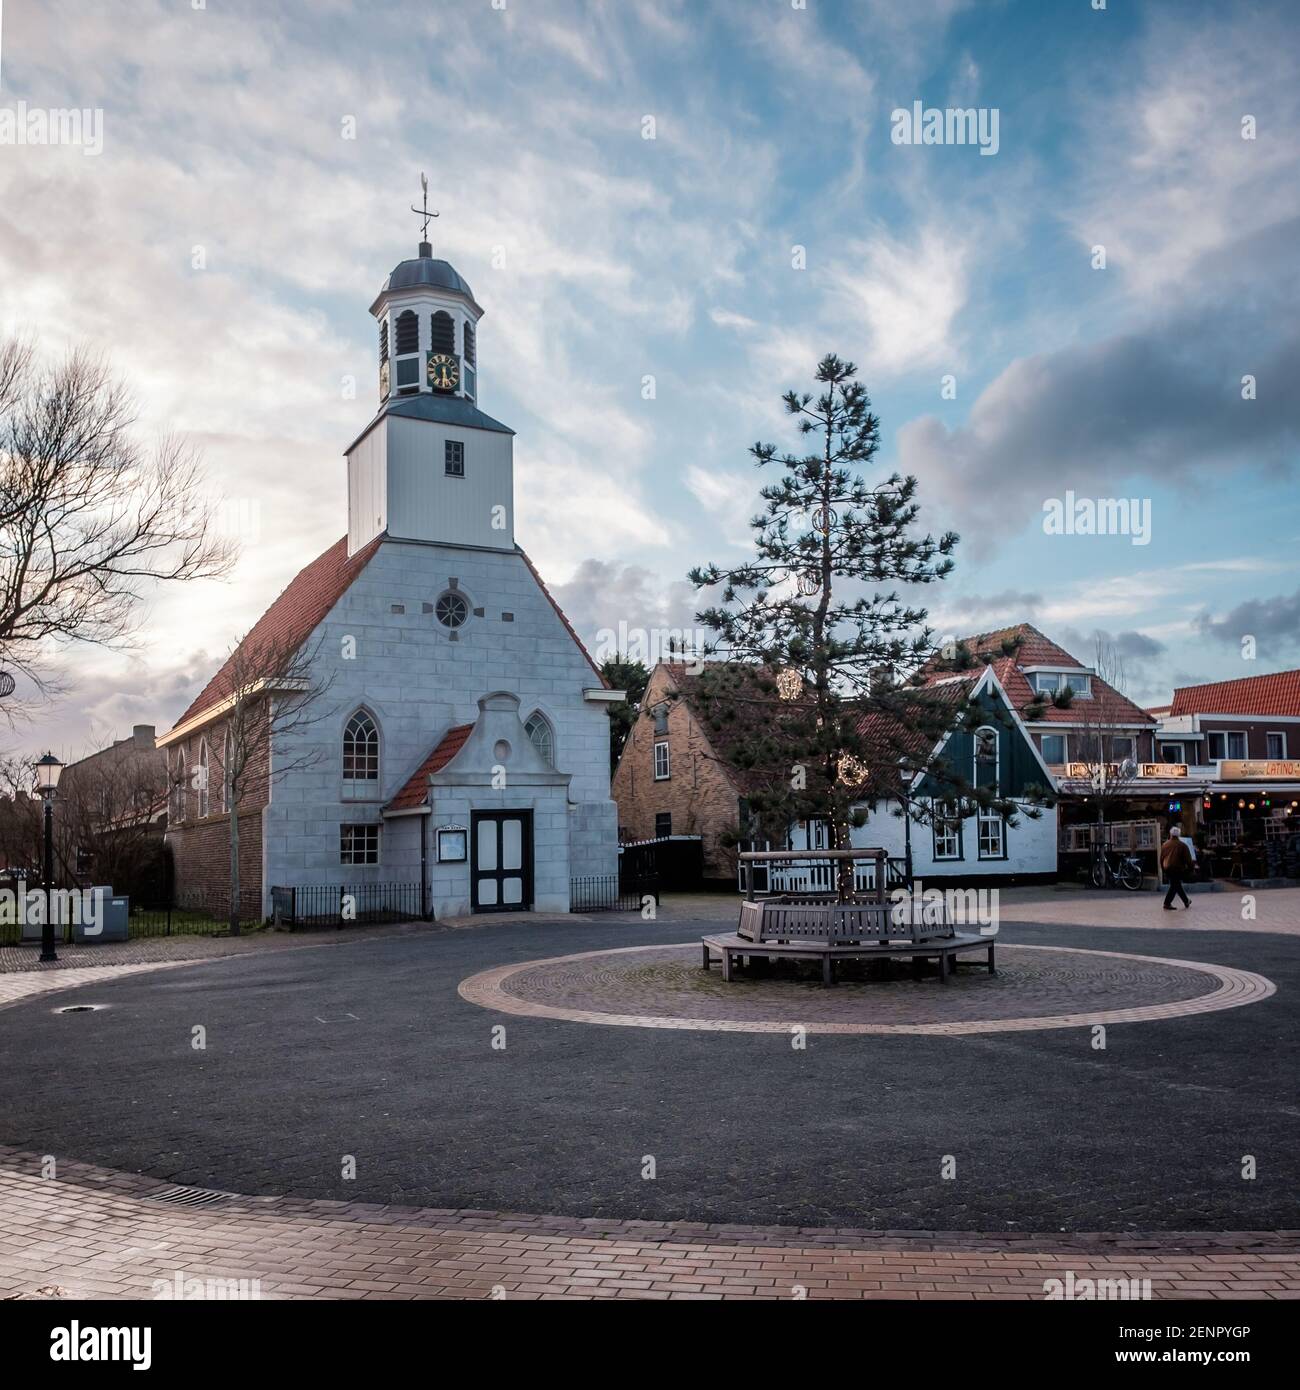 View on the church of the  tourist village of De Koog, located on the island of Texel. Stock Photo